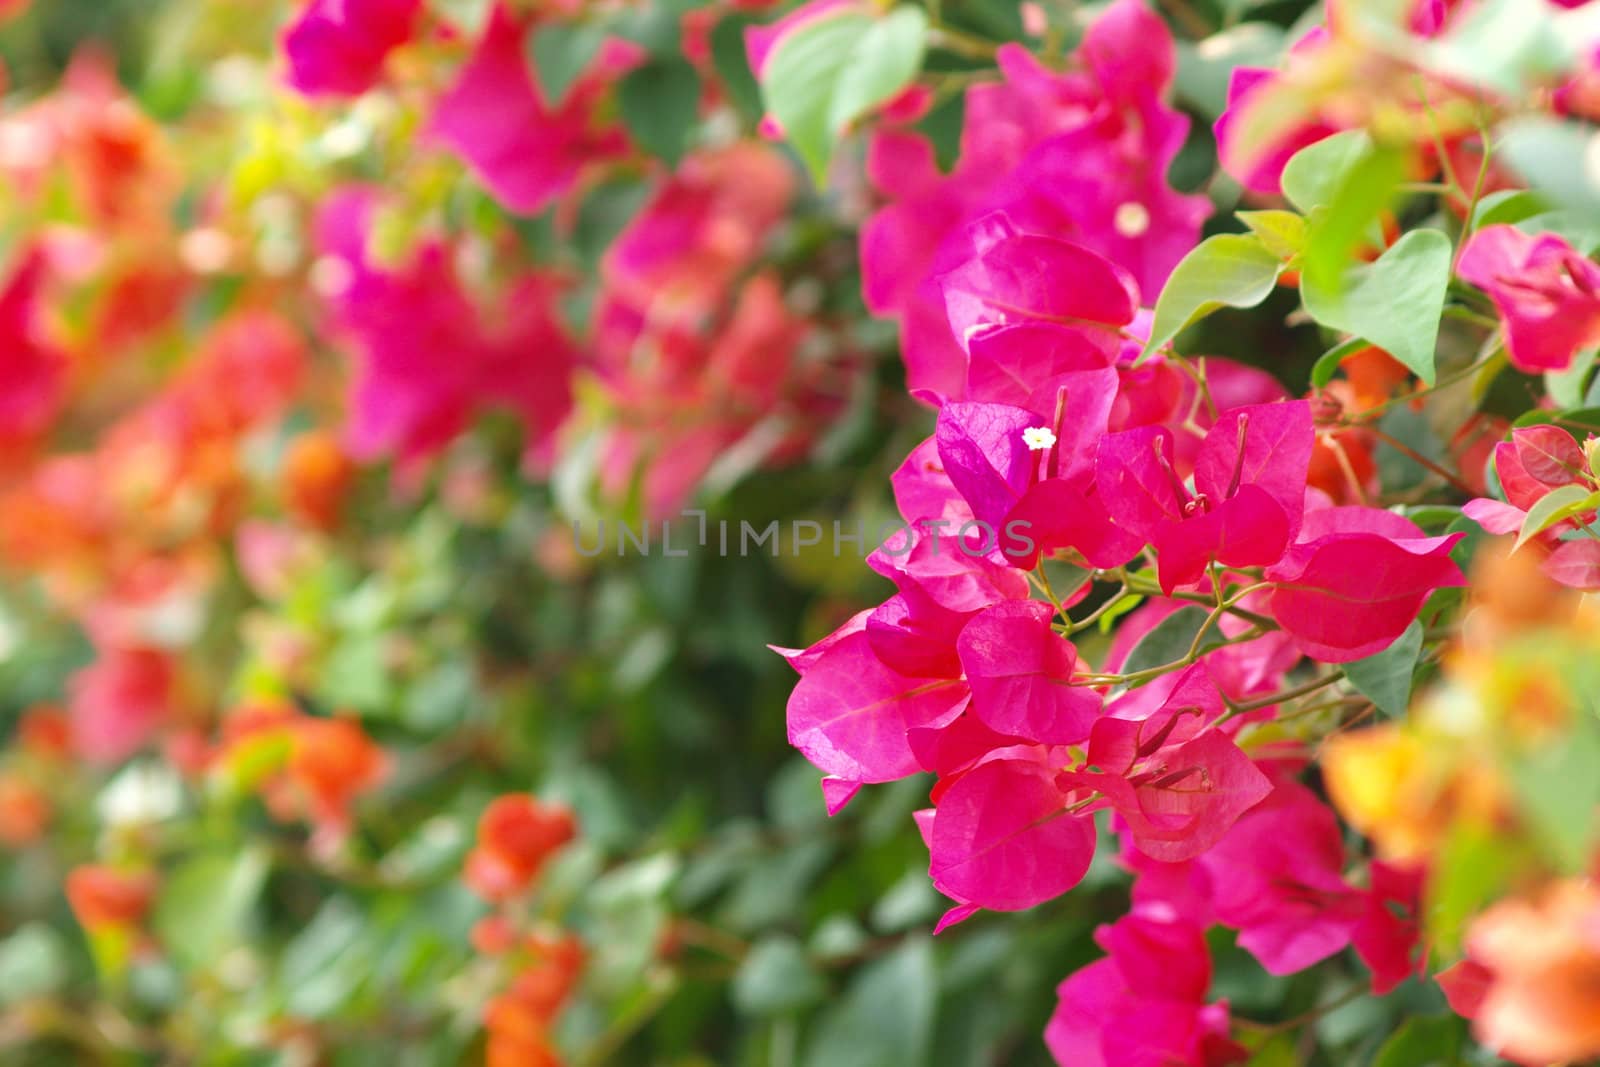 image of bright Bougainvillea by jakgree